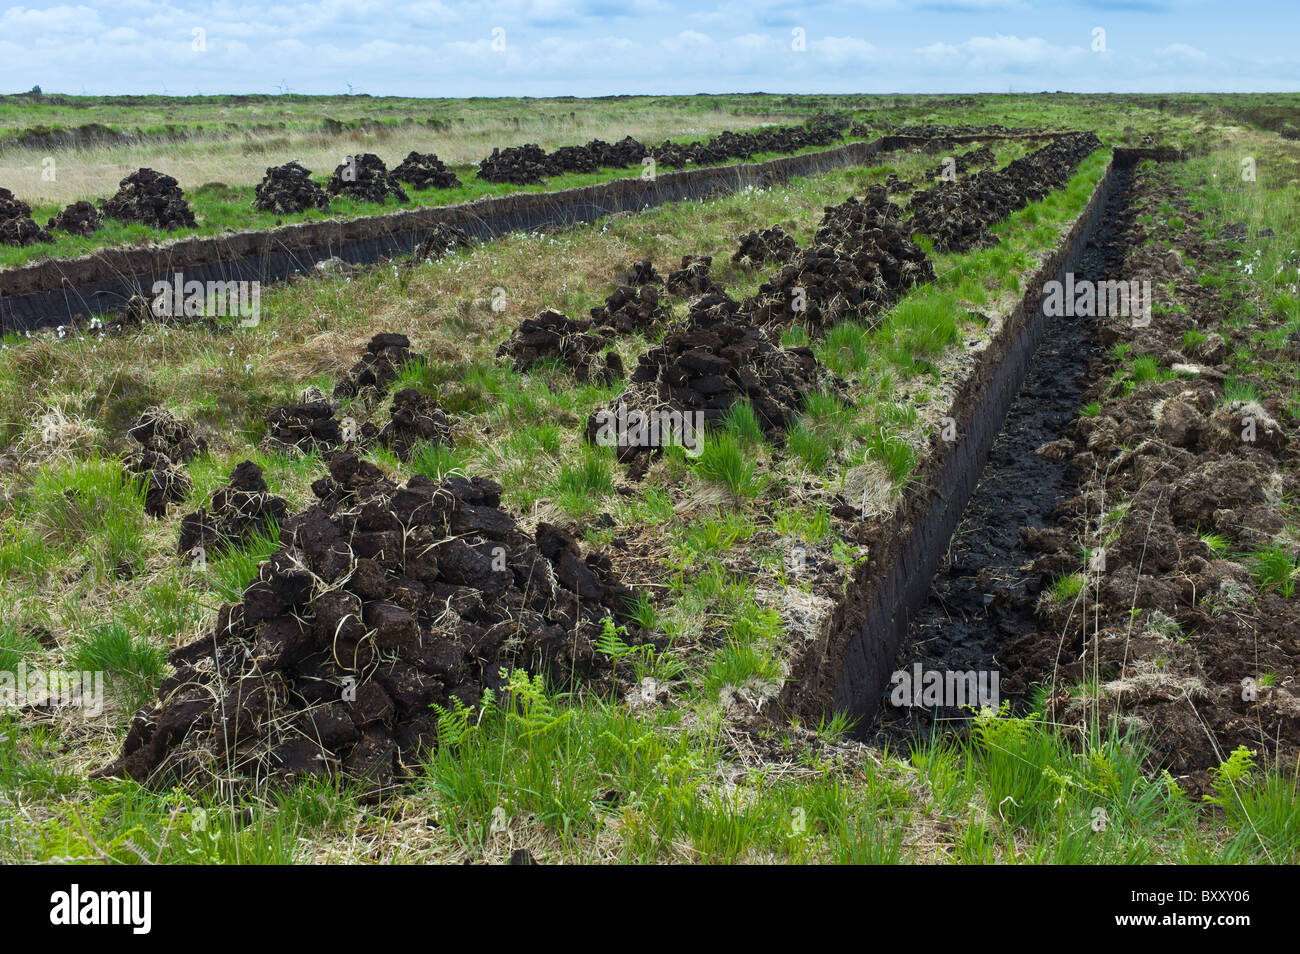 Turf bog shows cutting and stacks of peat (footings) at Mountrivers peat bog, County Clare, West of Ireland Stock Photo